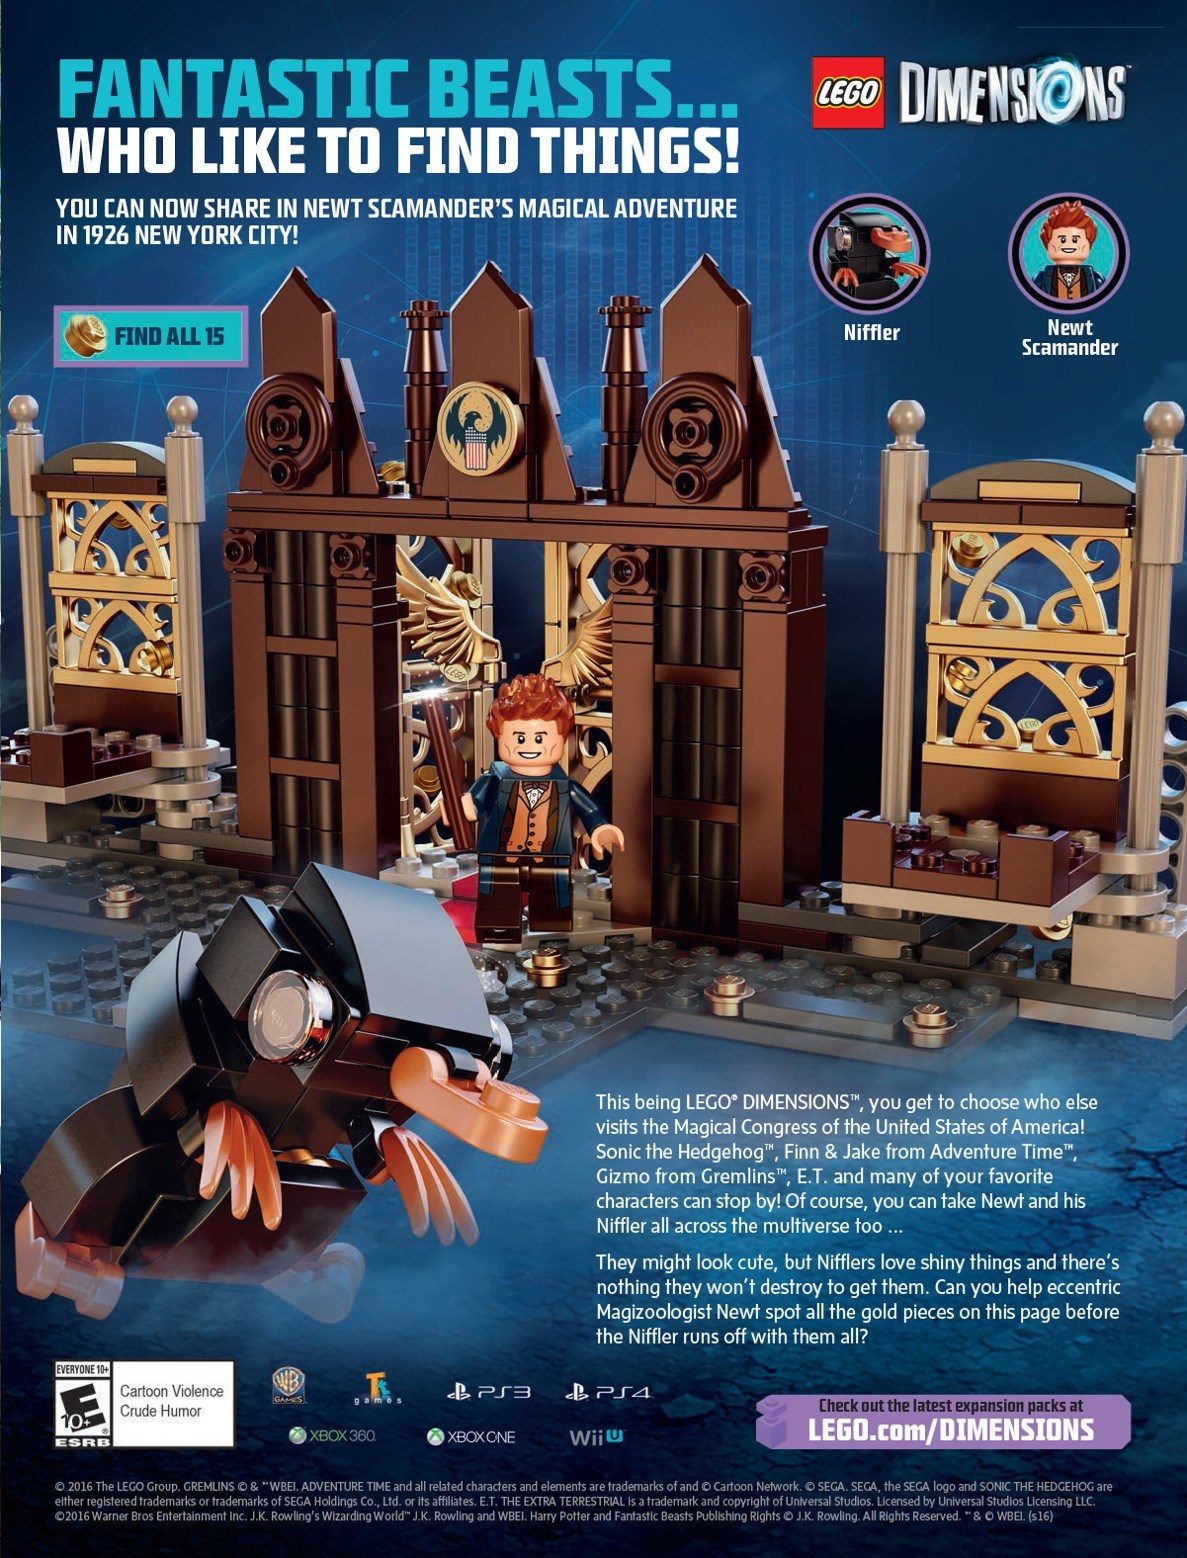 image-fantastic-beasts-who-like-to-find-things-jpg-lego-dimensions-wiki-fandom-powered-by